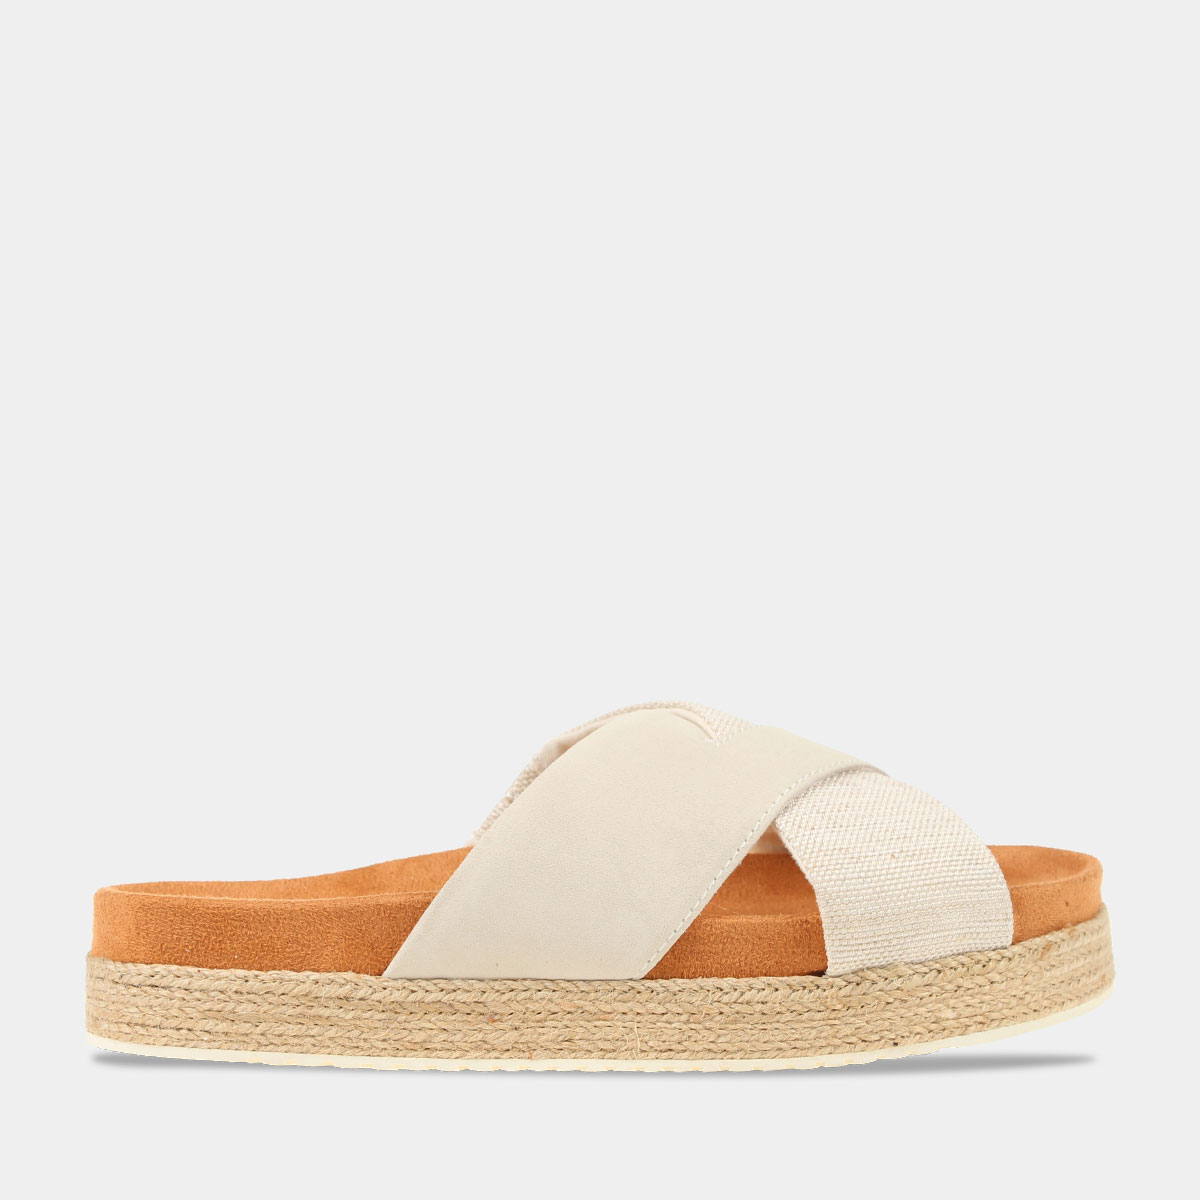 Toms Paloma Slippers - Dames - Beige - Maat 41/42